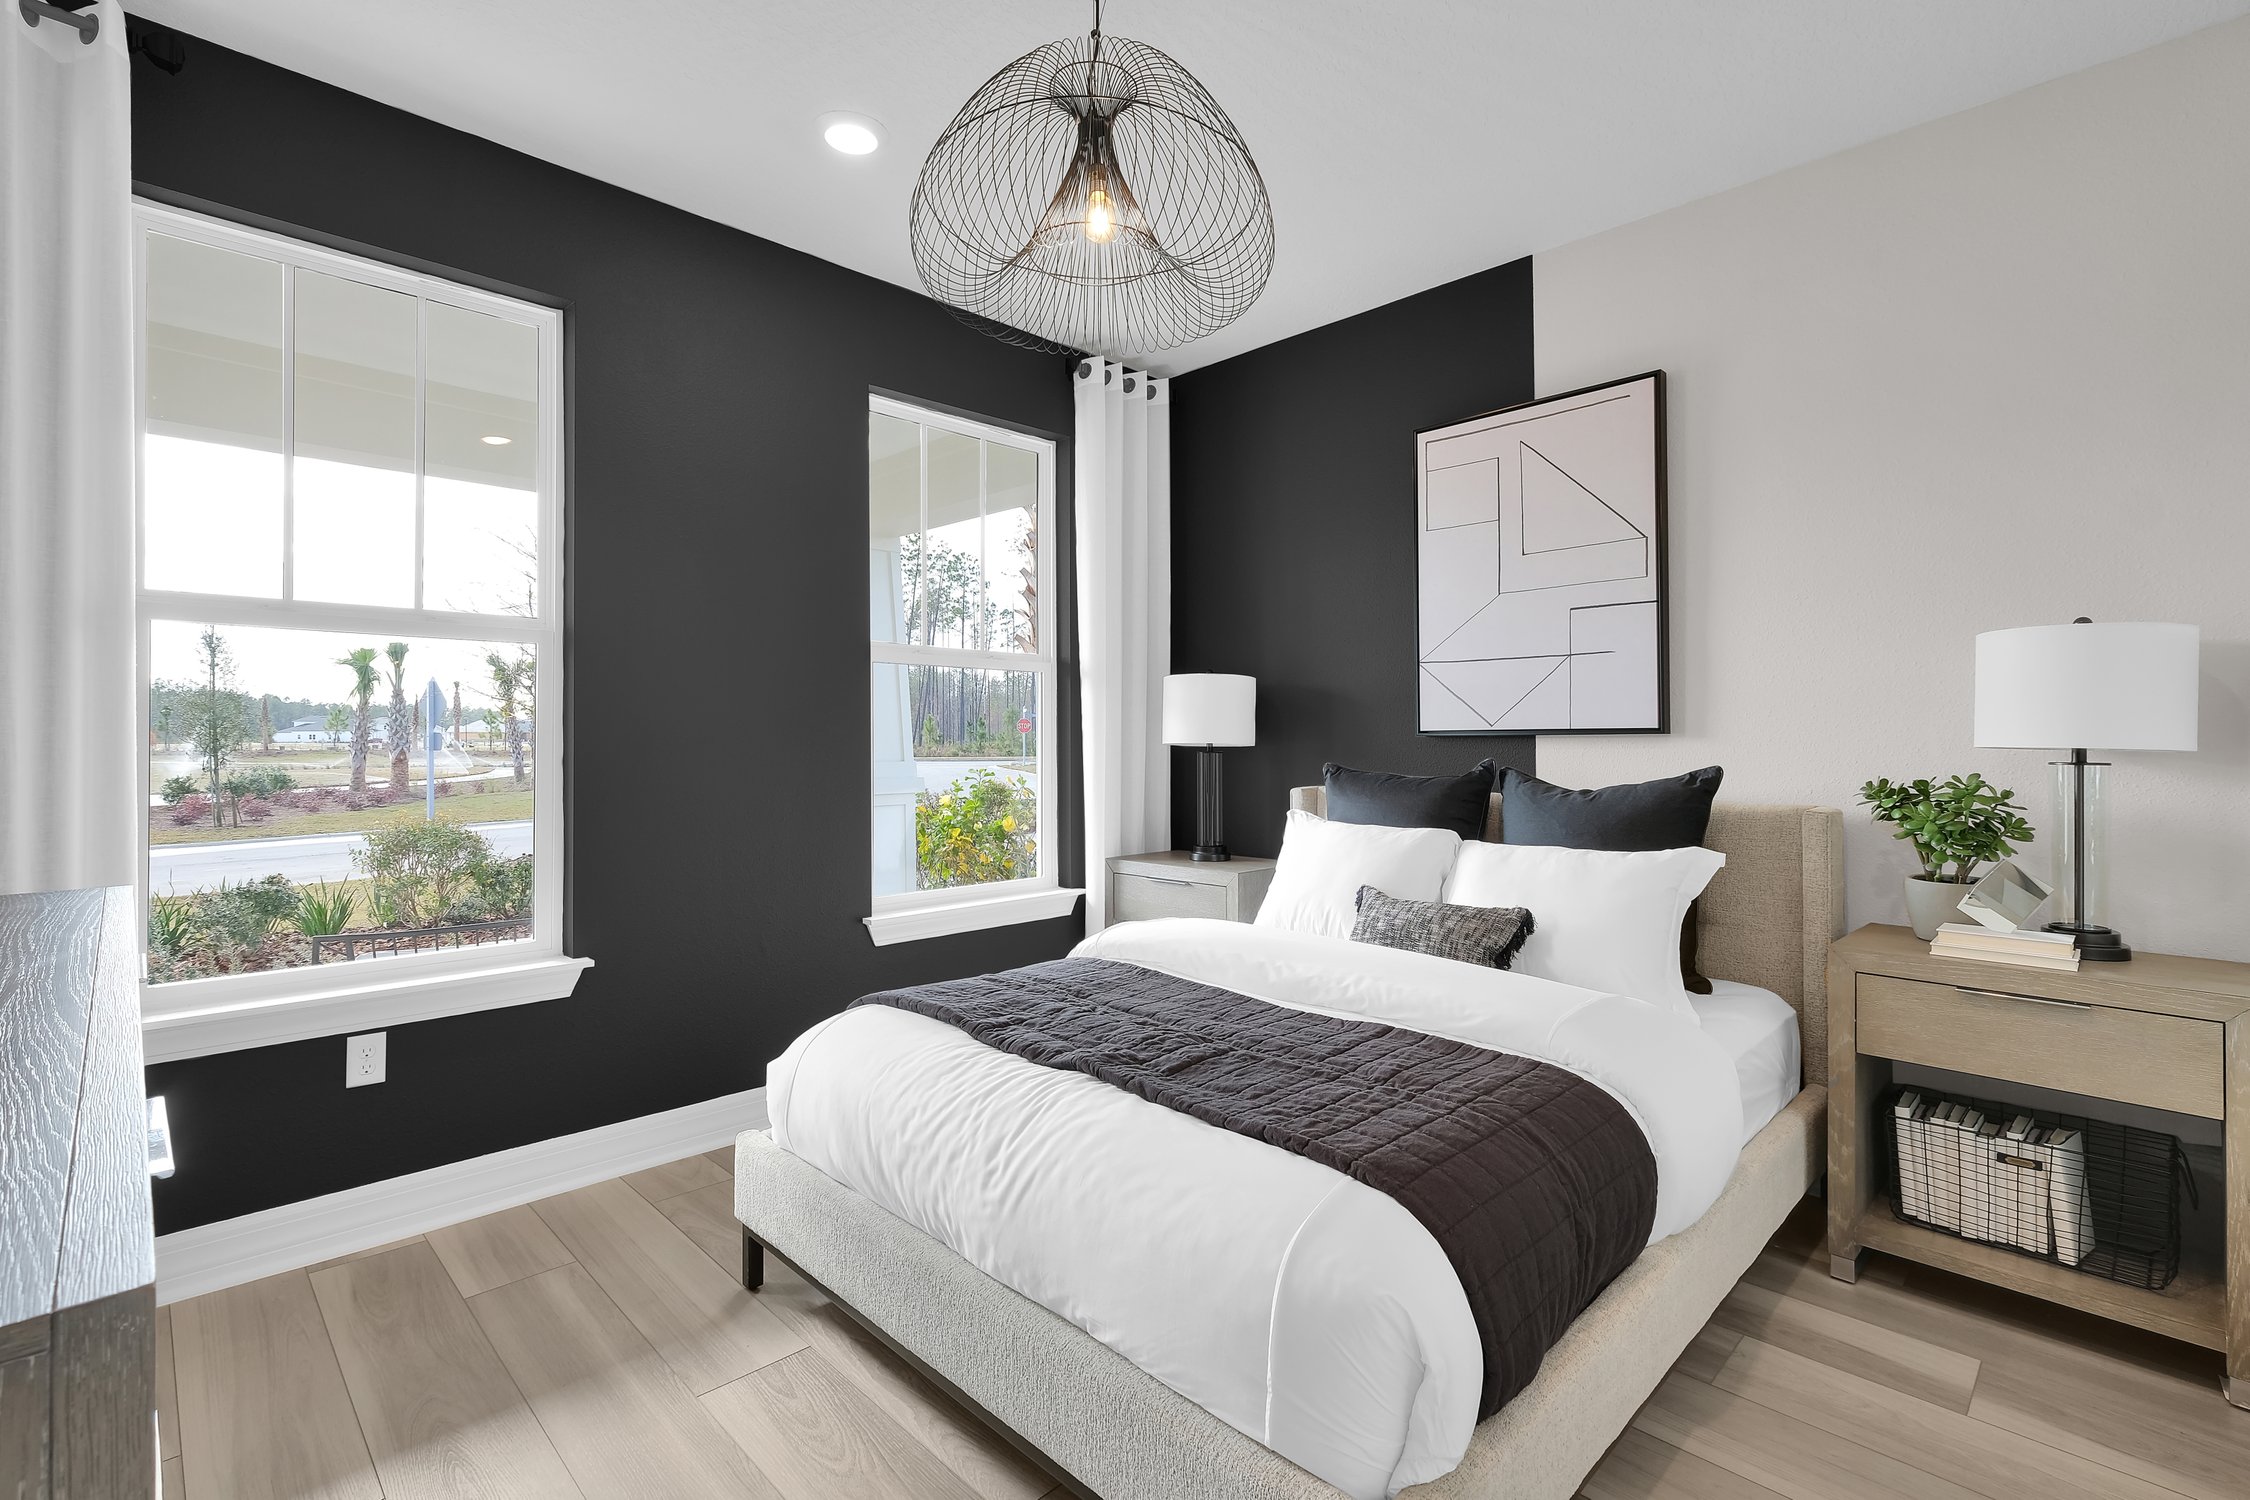 Pulte Homes Wildlight bedroom with two large windows, queen bed, two night stands and a dark blue accent wall.